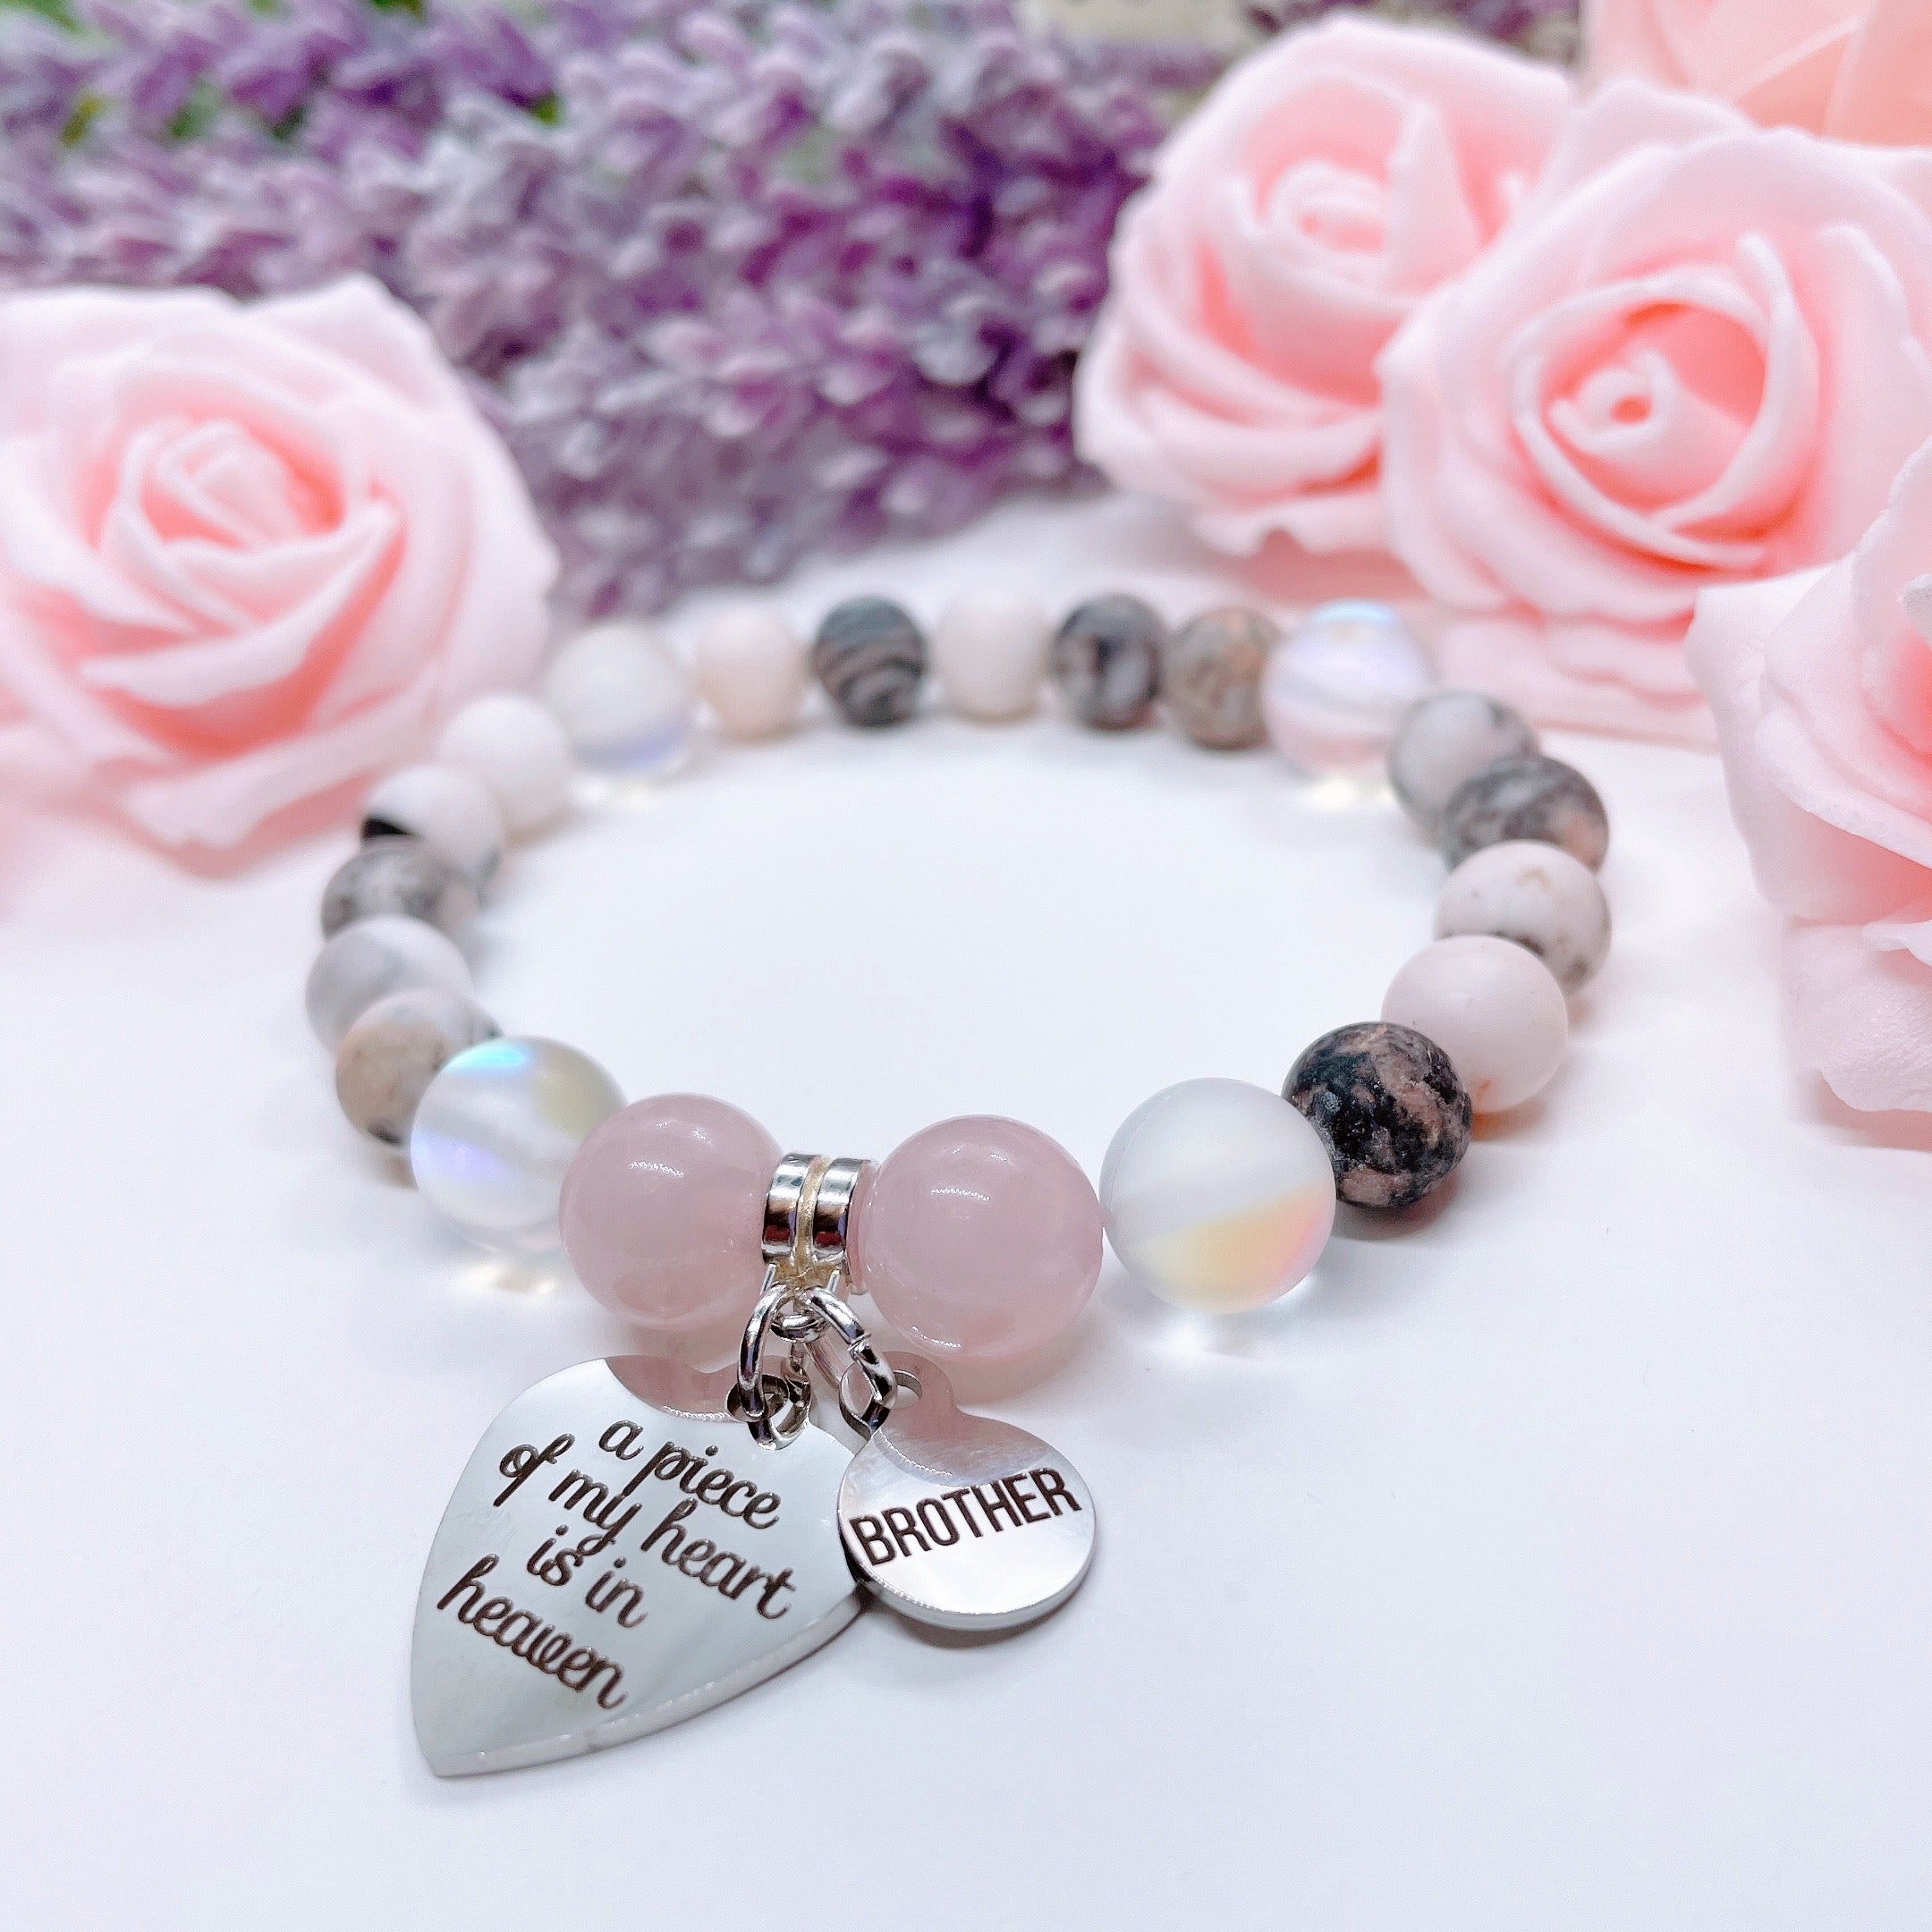 Brother: A Piece of my Heart is in Heaven Heart Charm Bracelet